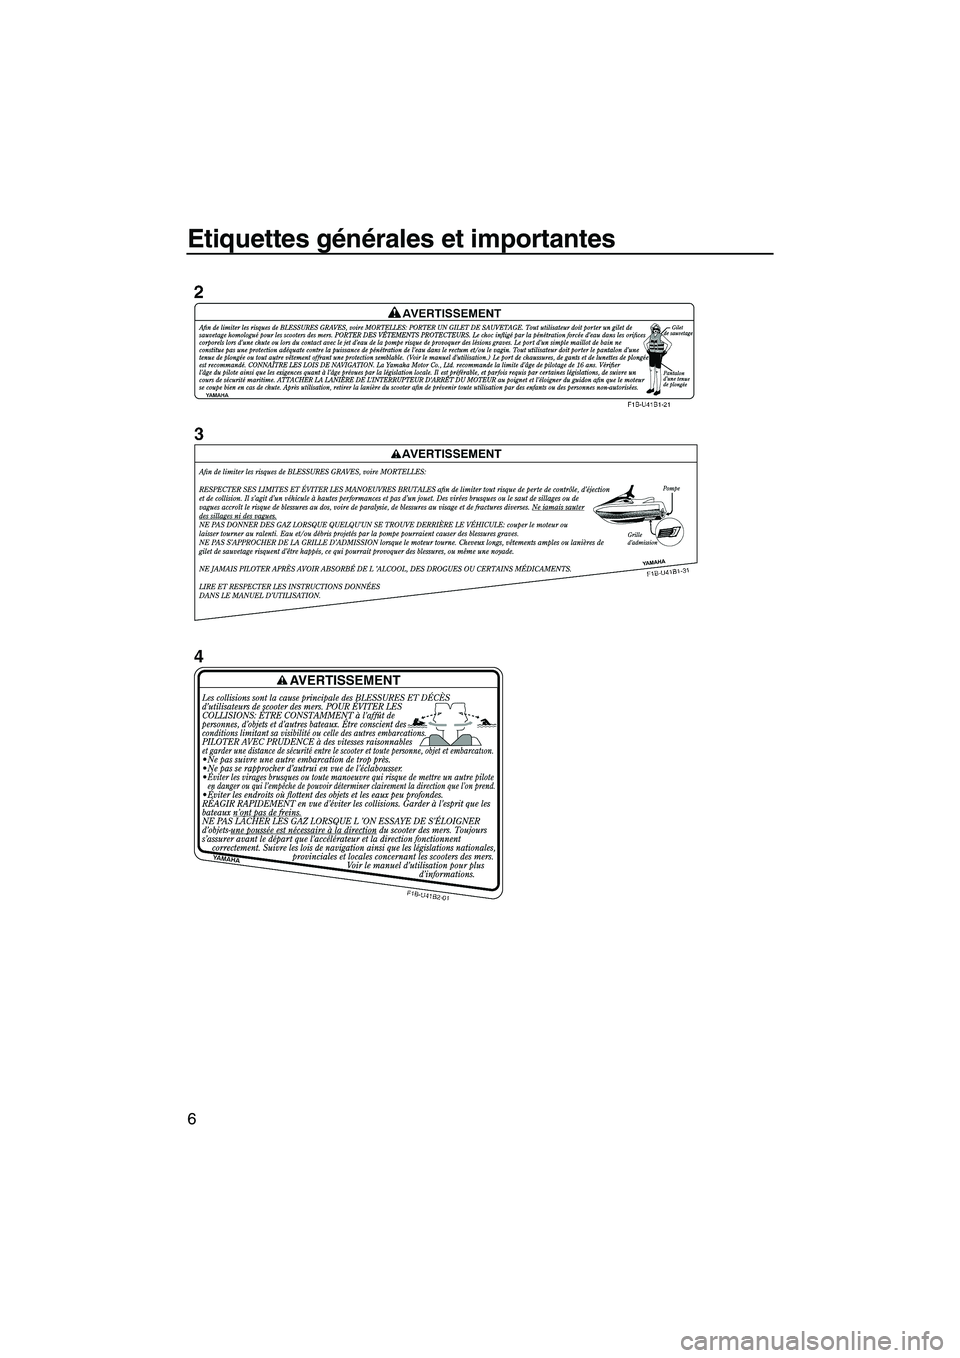 YAMAHA SVHO 2011  Notices Demploi (in French) Etiquettes générales et importantes
6
UF1W73F0.book  Page 6  Wednesday, June 16, 2010  1:24 PM 